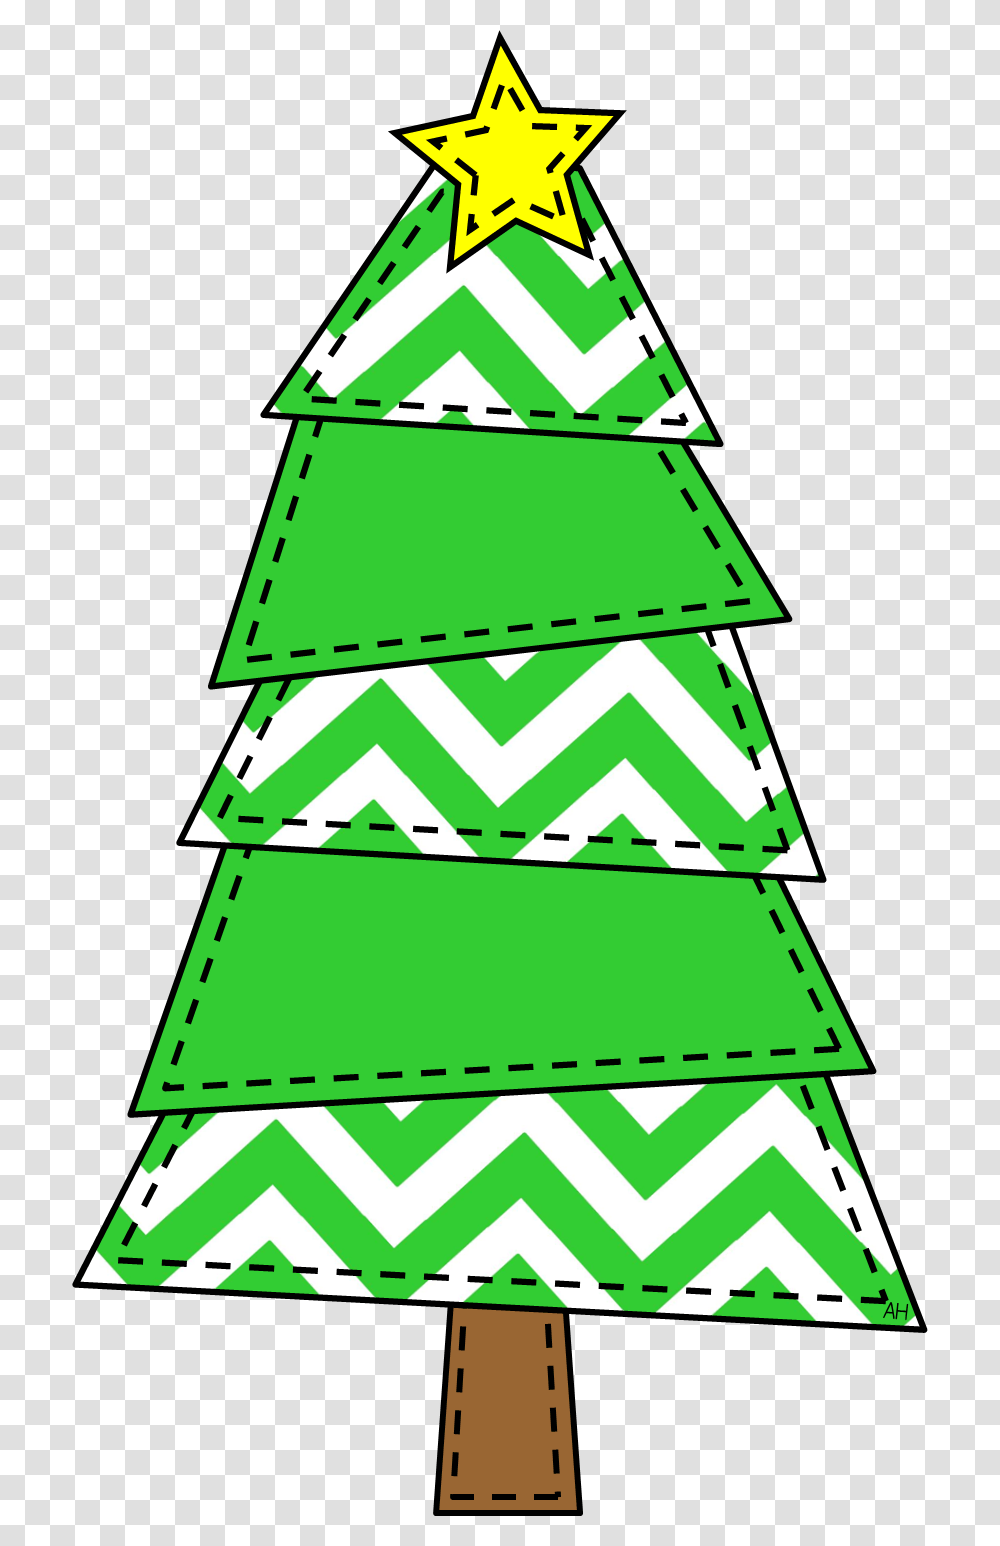 Free December Clipart Image Christmas Tree Clipart Melonheadz, Plant, Ornament, Triangle, Star Symbol Transparent Png